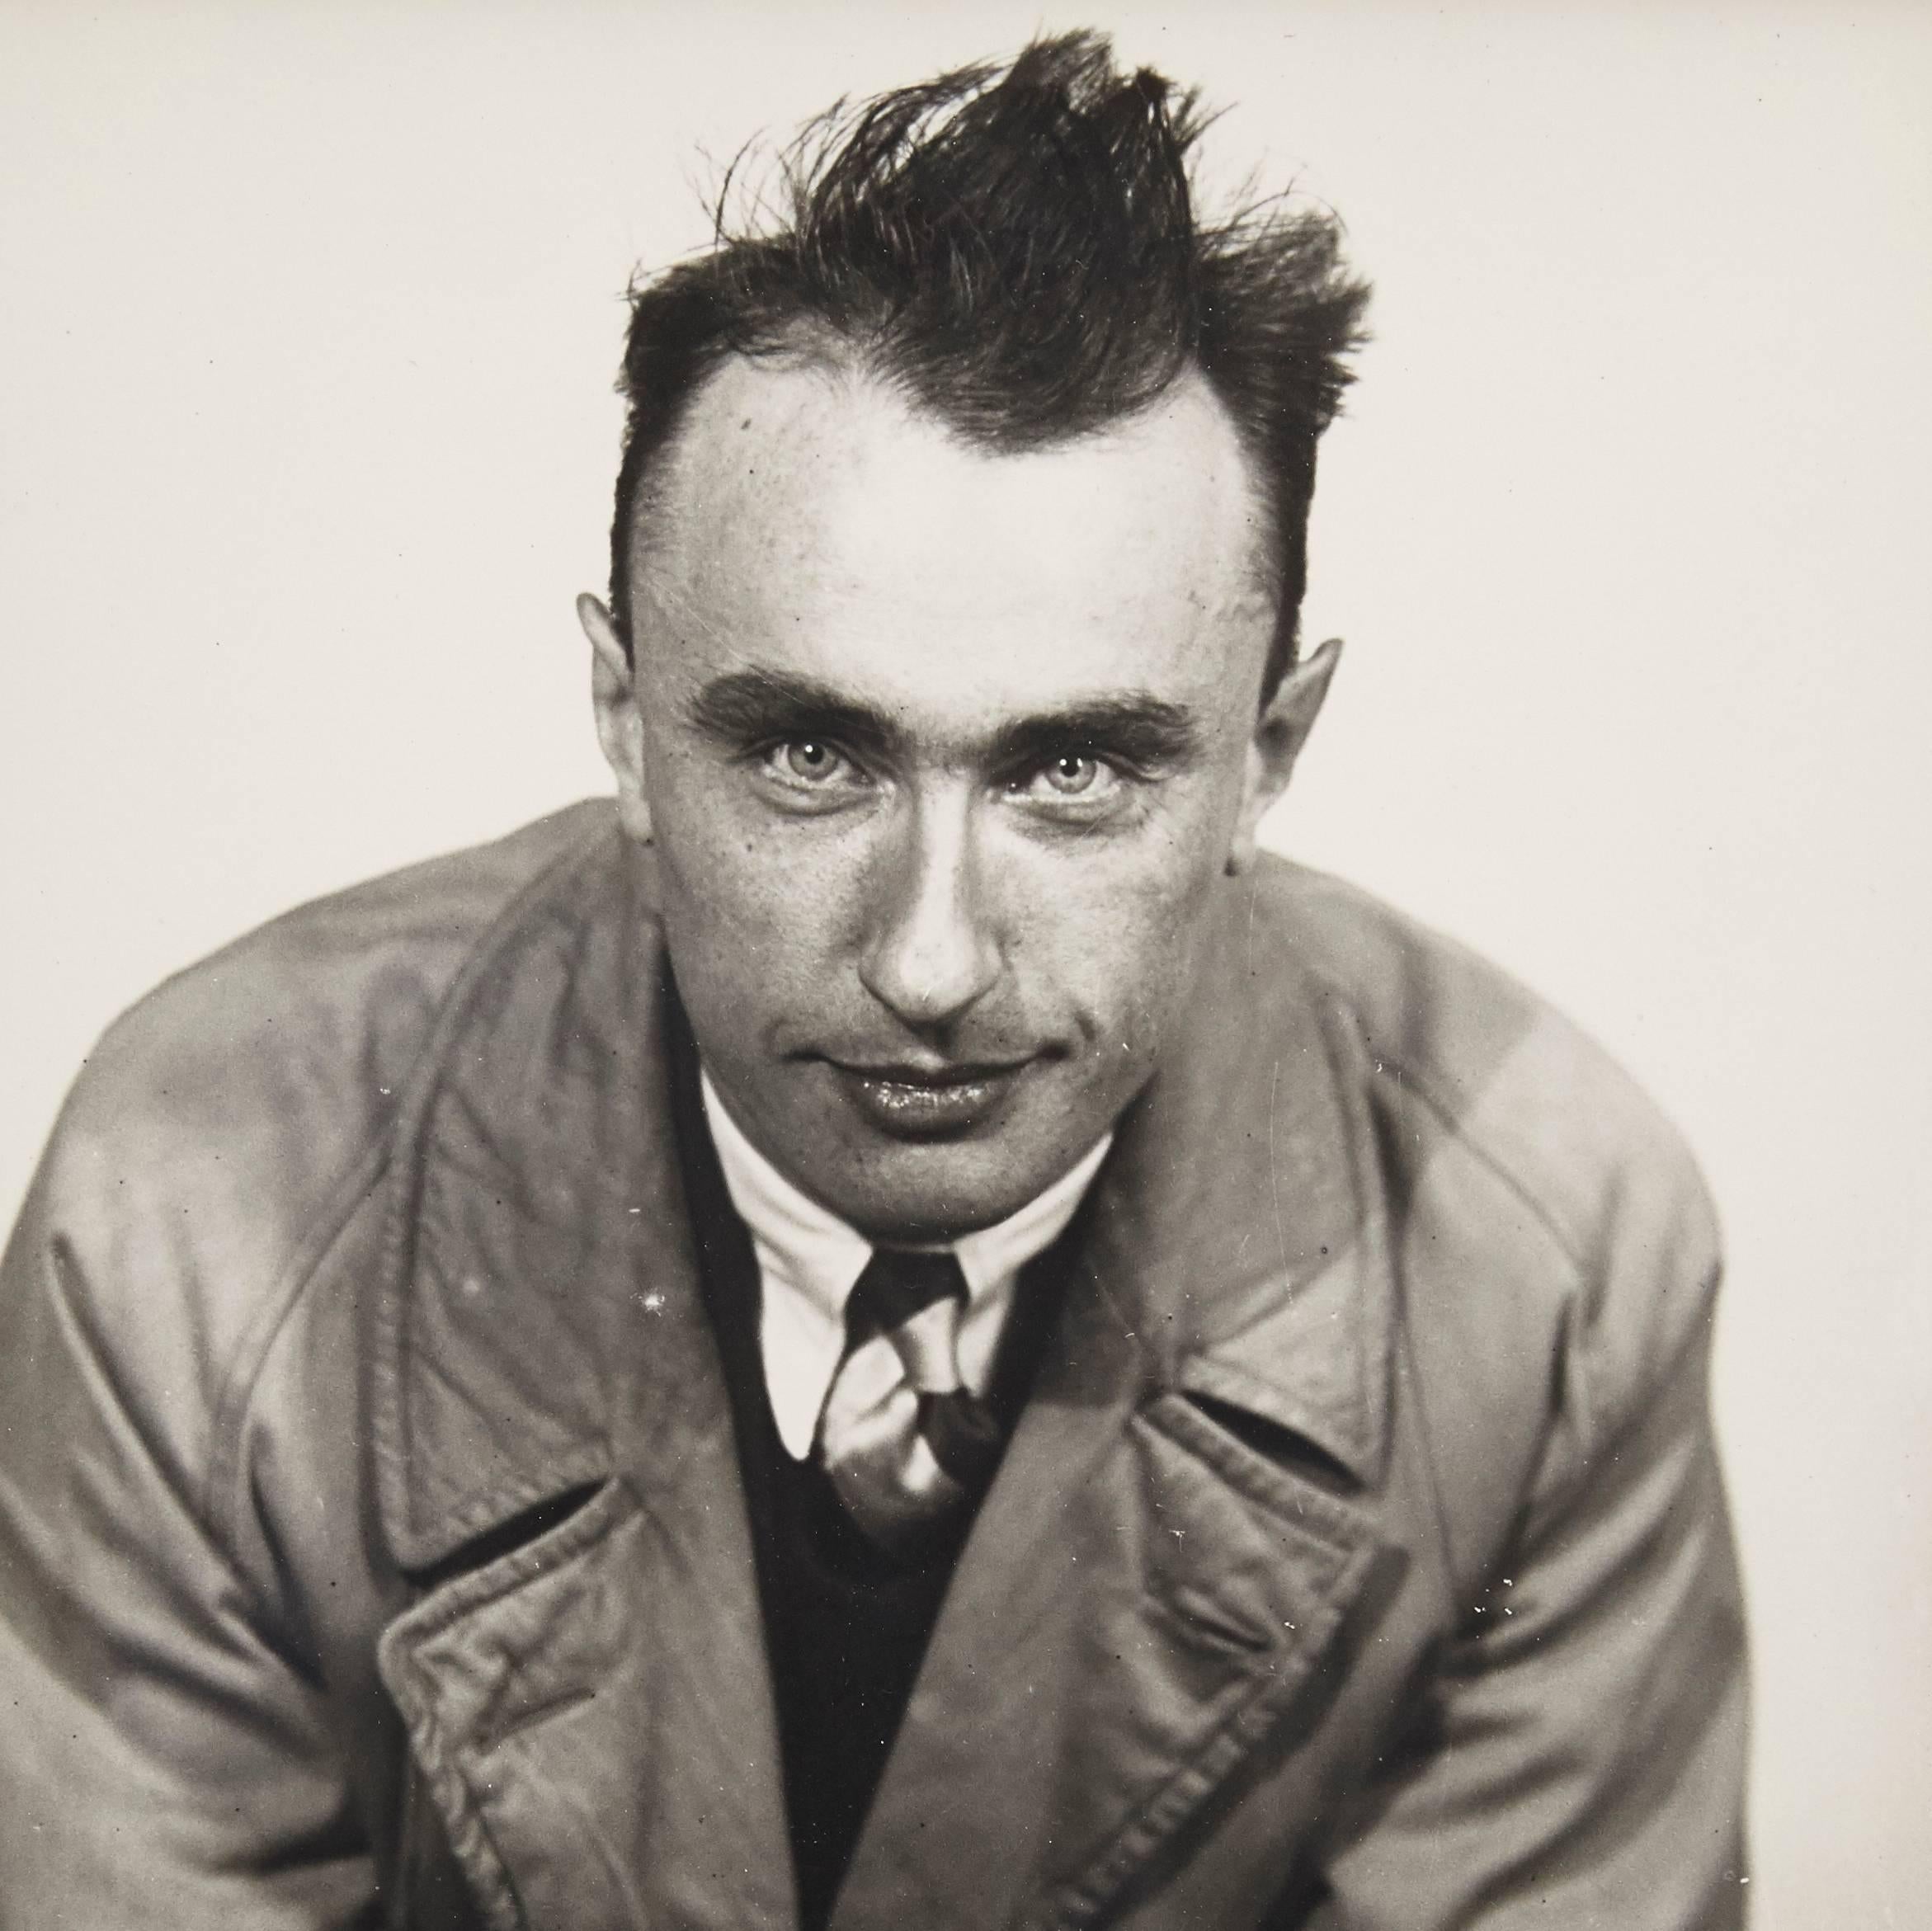 Portrait of Yves Tanguy photographed by Man Ray, circa 1930.

A posthumous print from the original negative in 1977 by Pierre Gassmann.

Gelatin silver bromide.

Born (Philadelphia, 1890 - Paris, 1976) Emmanuel Radnitzky, Man Ray adopted his